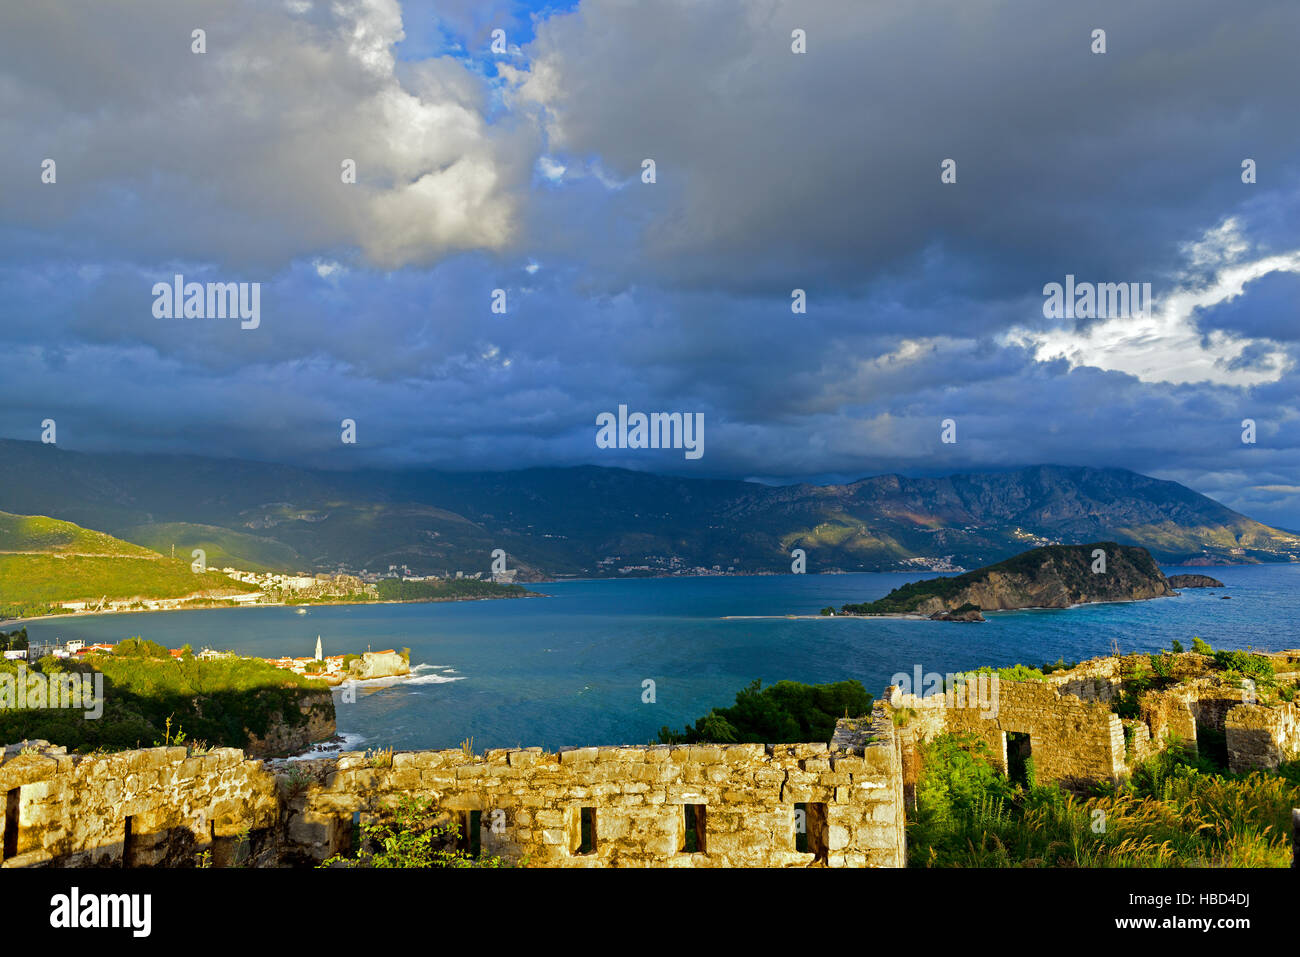 View to Budva Old town and bay from ruins of medieval fortress Tvrdava Mogren at the shore of Adriatic sea. Historic attractions of Budva, Montenegro Stock Photo